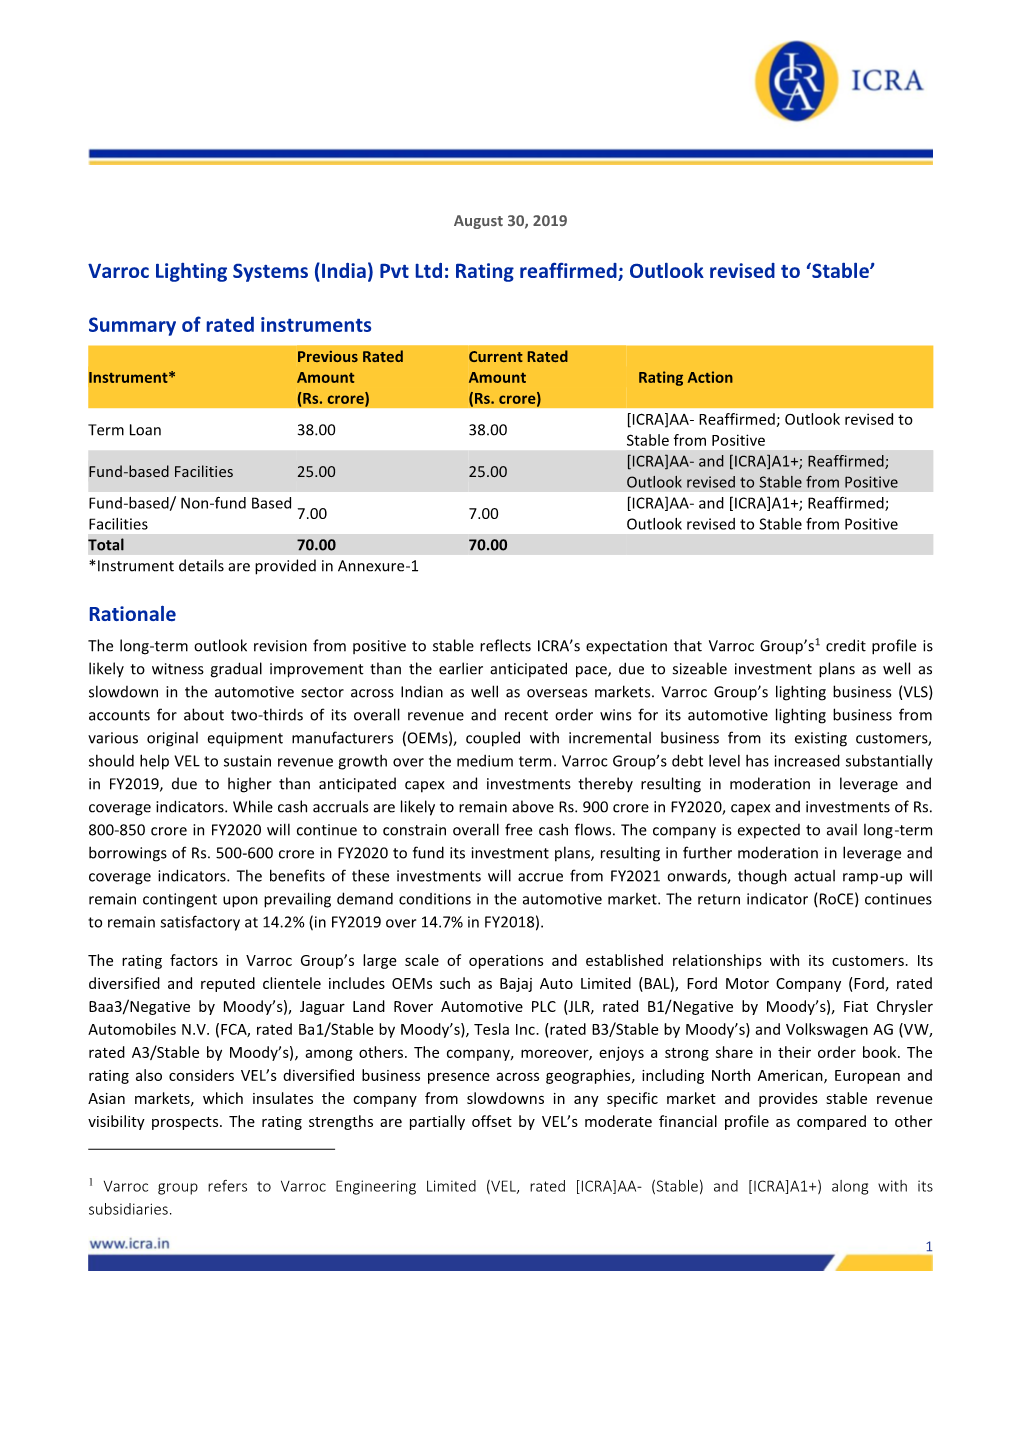 Varroc Lighting Systems (India) Pvt Ltd: Rating Reaffirmed; Outlook Revised to ‘Stable’